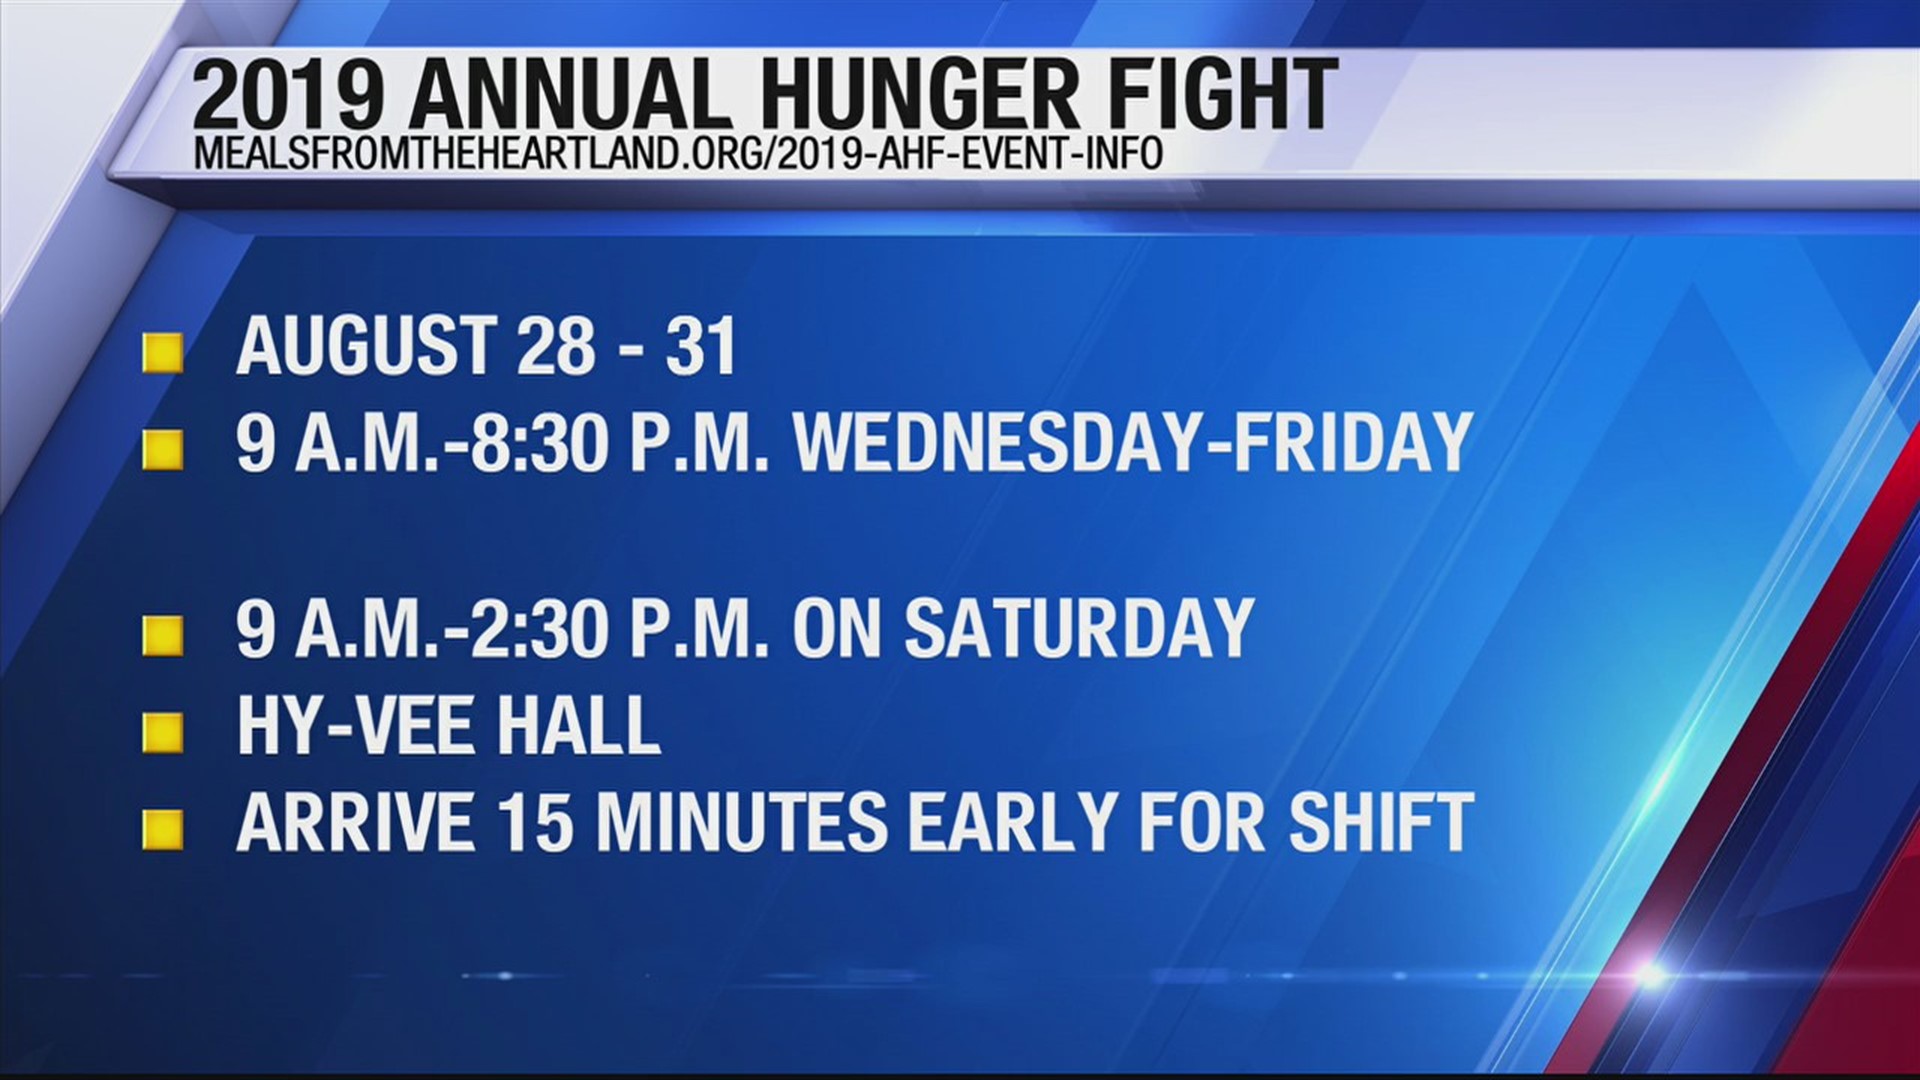 DES MOINES-- This week, you donate just a few hours of your time and join the humanitarian effort to end hunger at the 12th Annual Meals from the Heartland Hunger Fight.